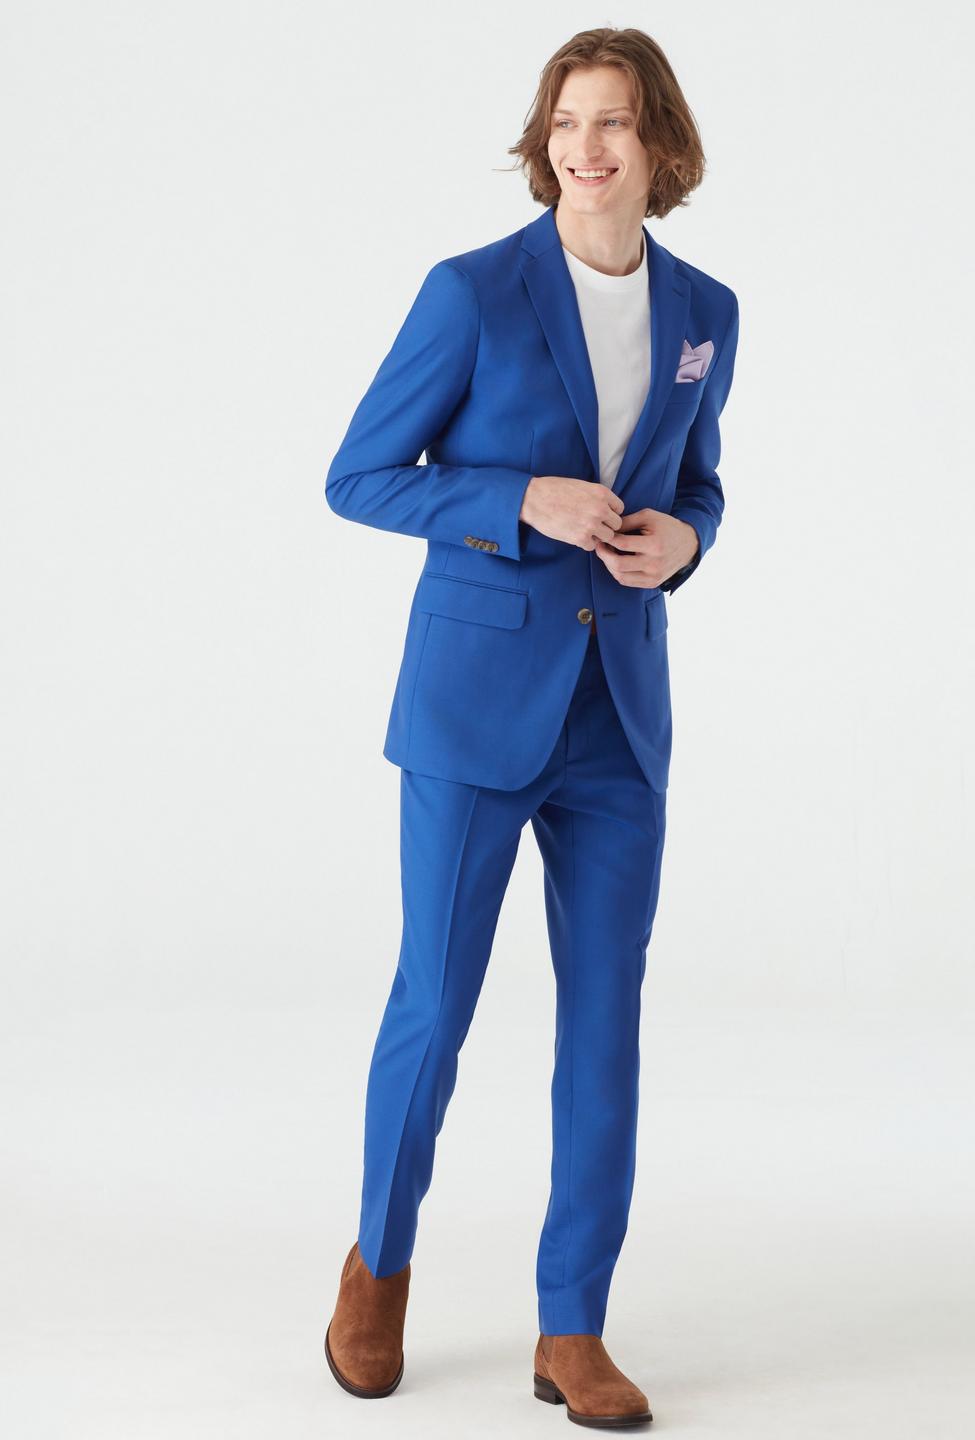 Blue suit - Solid Design from Seasonal Indochino Collection